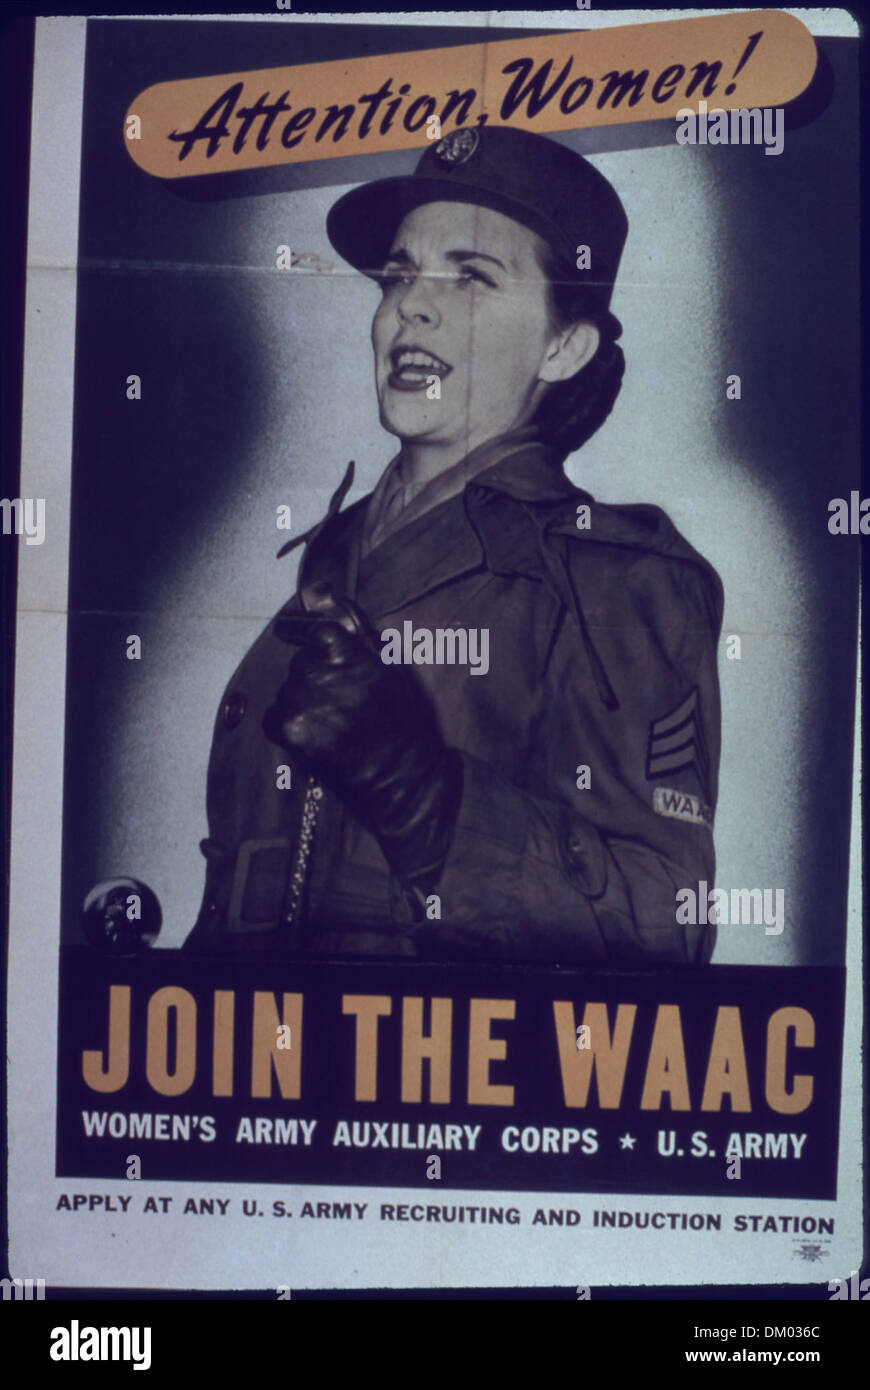 'Attention, women Join the WAAC' 513892 Stock Photo